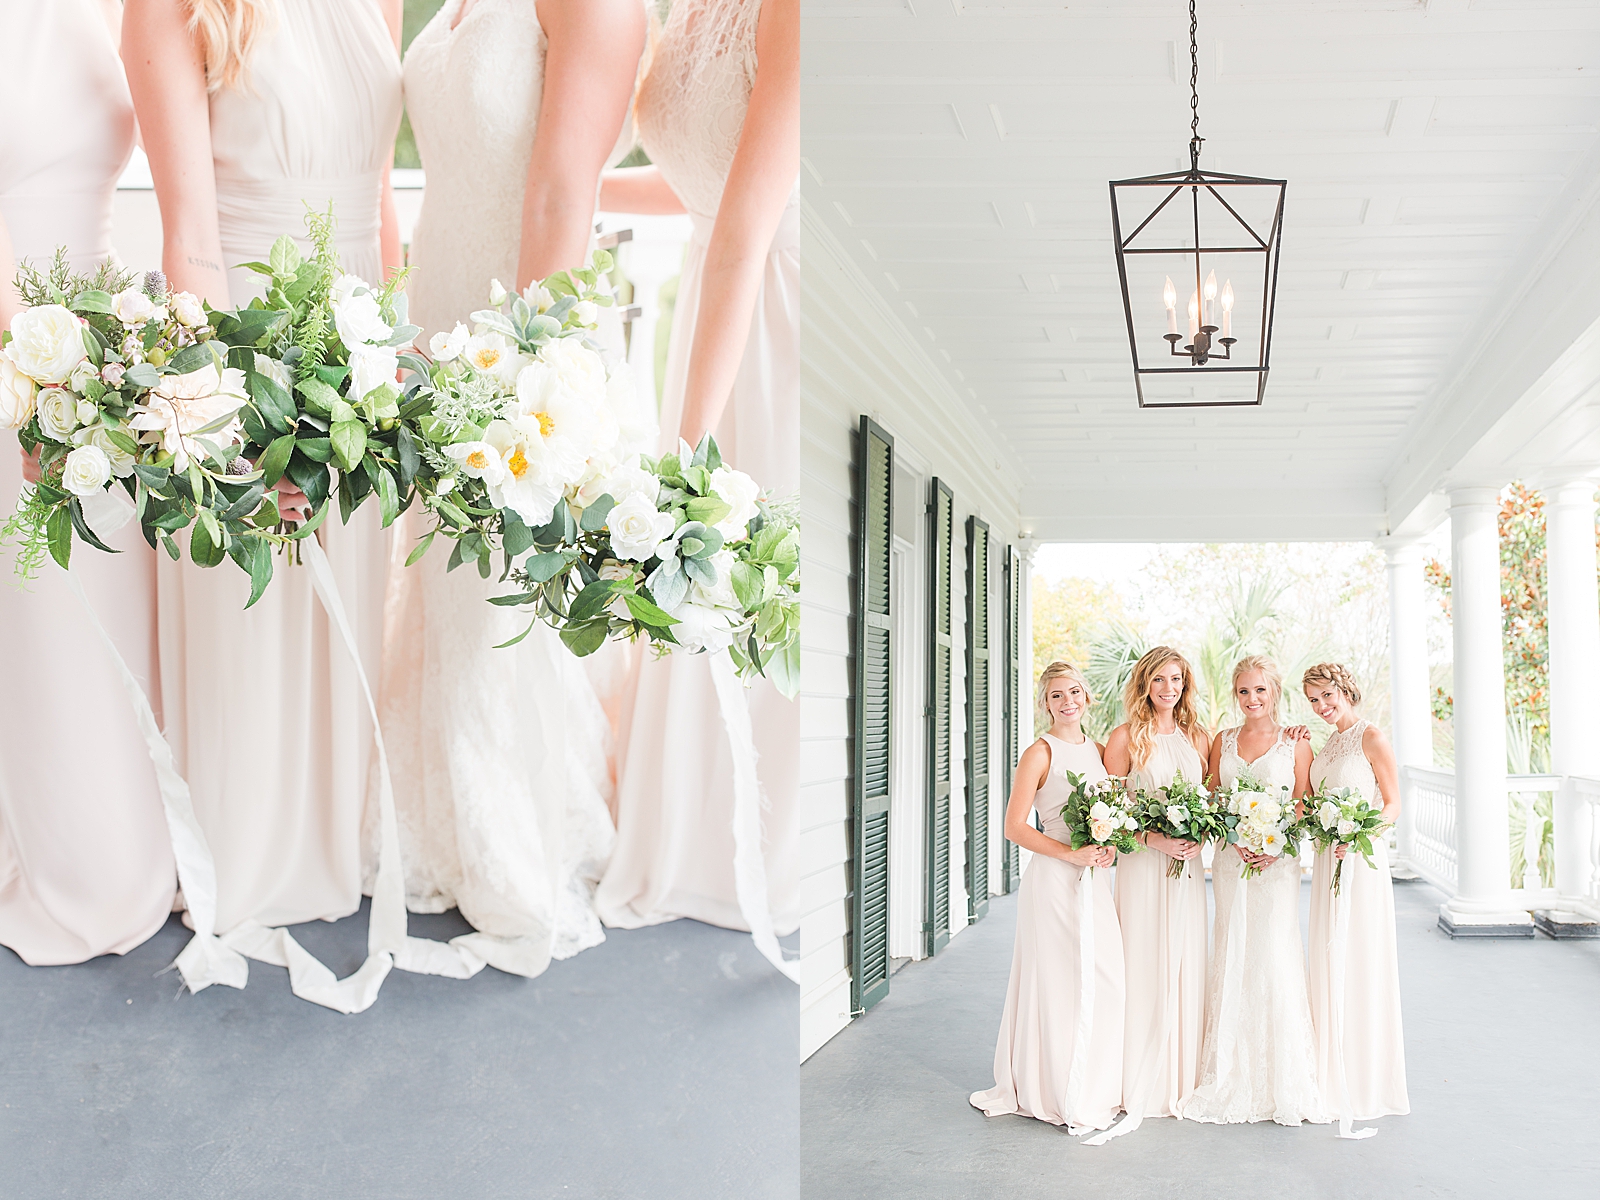 Charleston Photography Bridal Session detail of bride and bridesmaids bouquets and girls smiling at camera on porch Photos